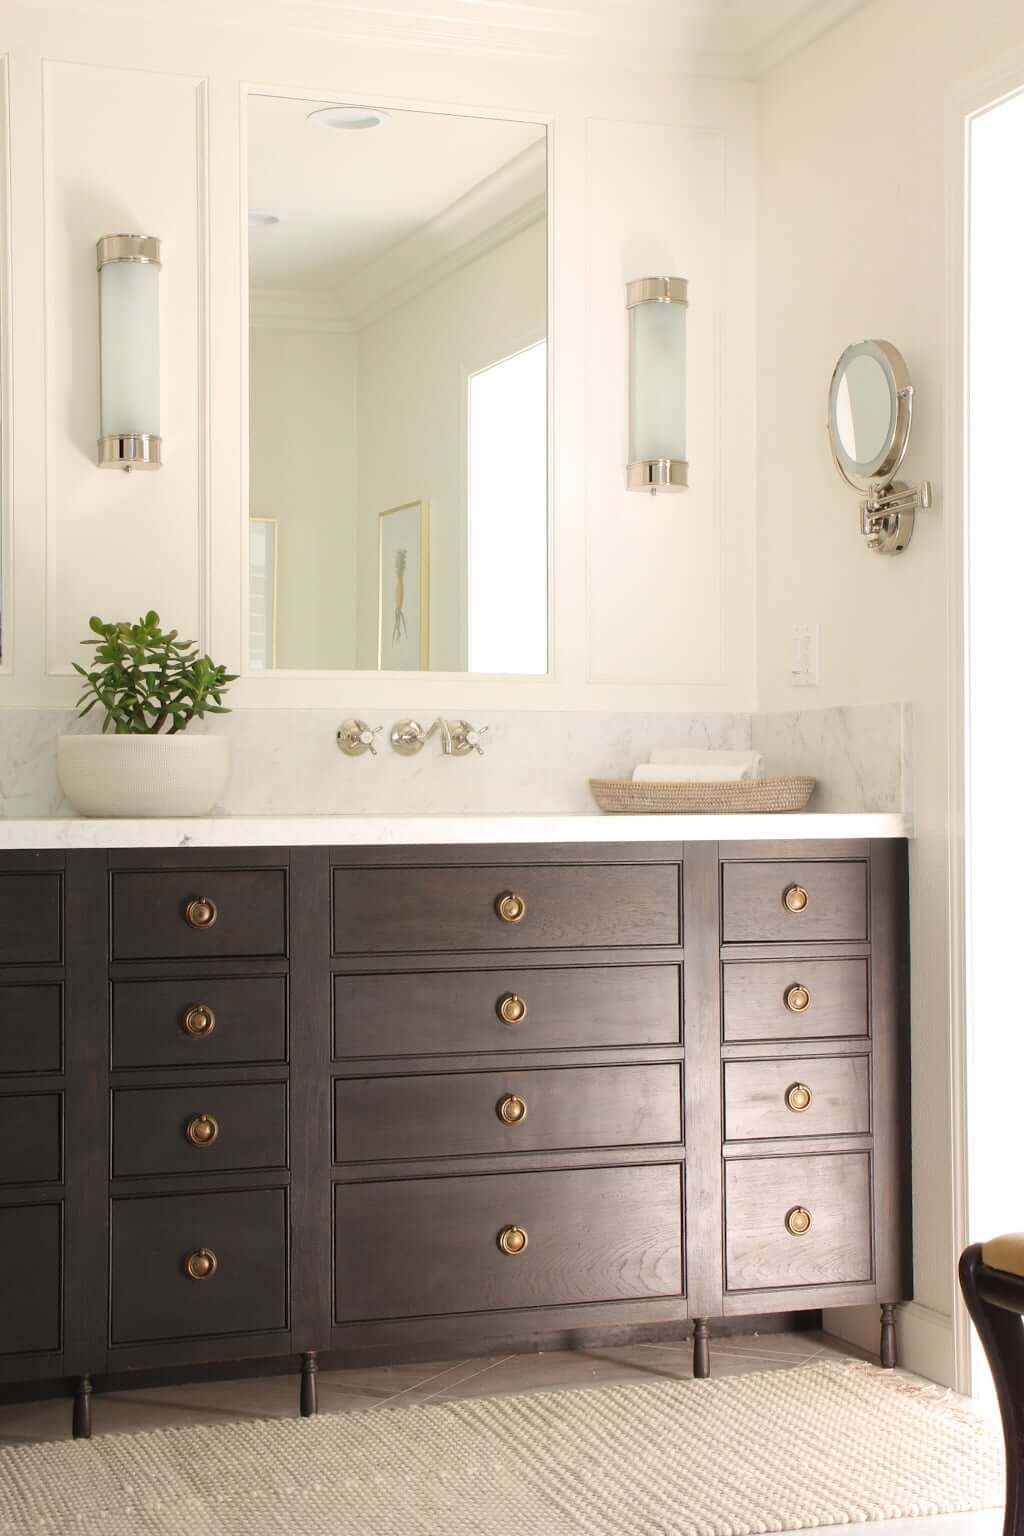 one side of master bathroom double vanity, wood with marble counter and brass ring pulls, wall-mounted faucet in polished nickel and wall sconces